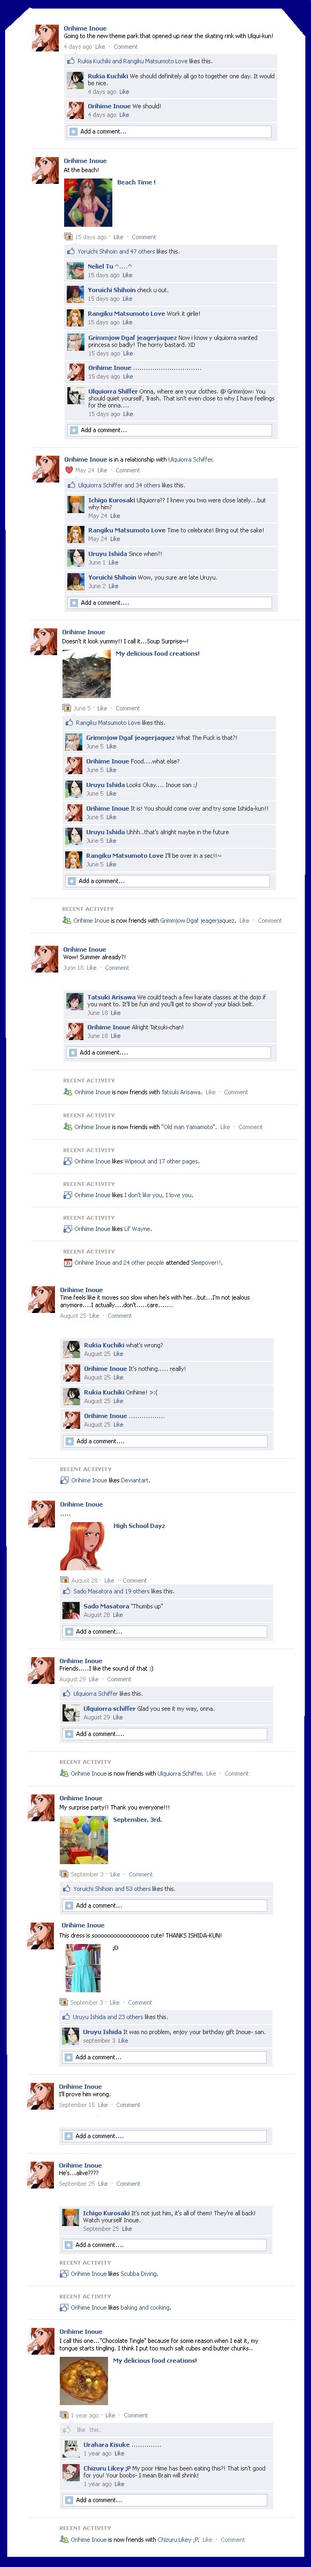 Orihime Facebook Wall